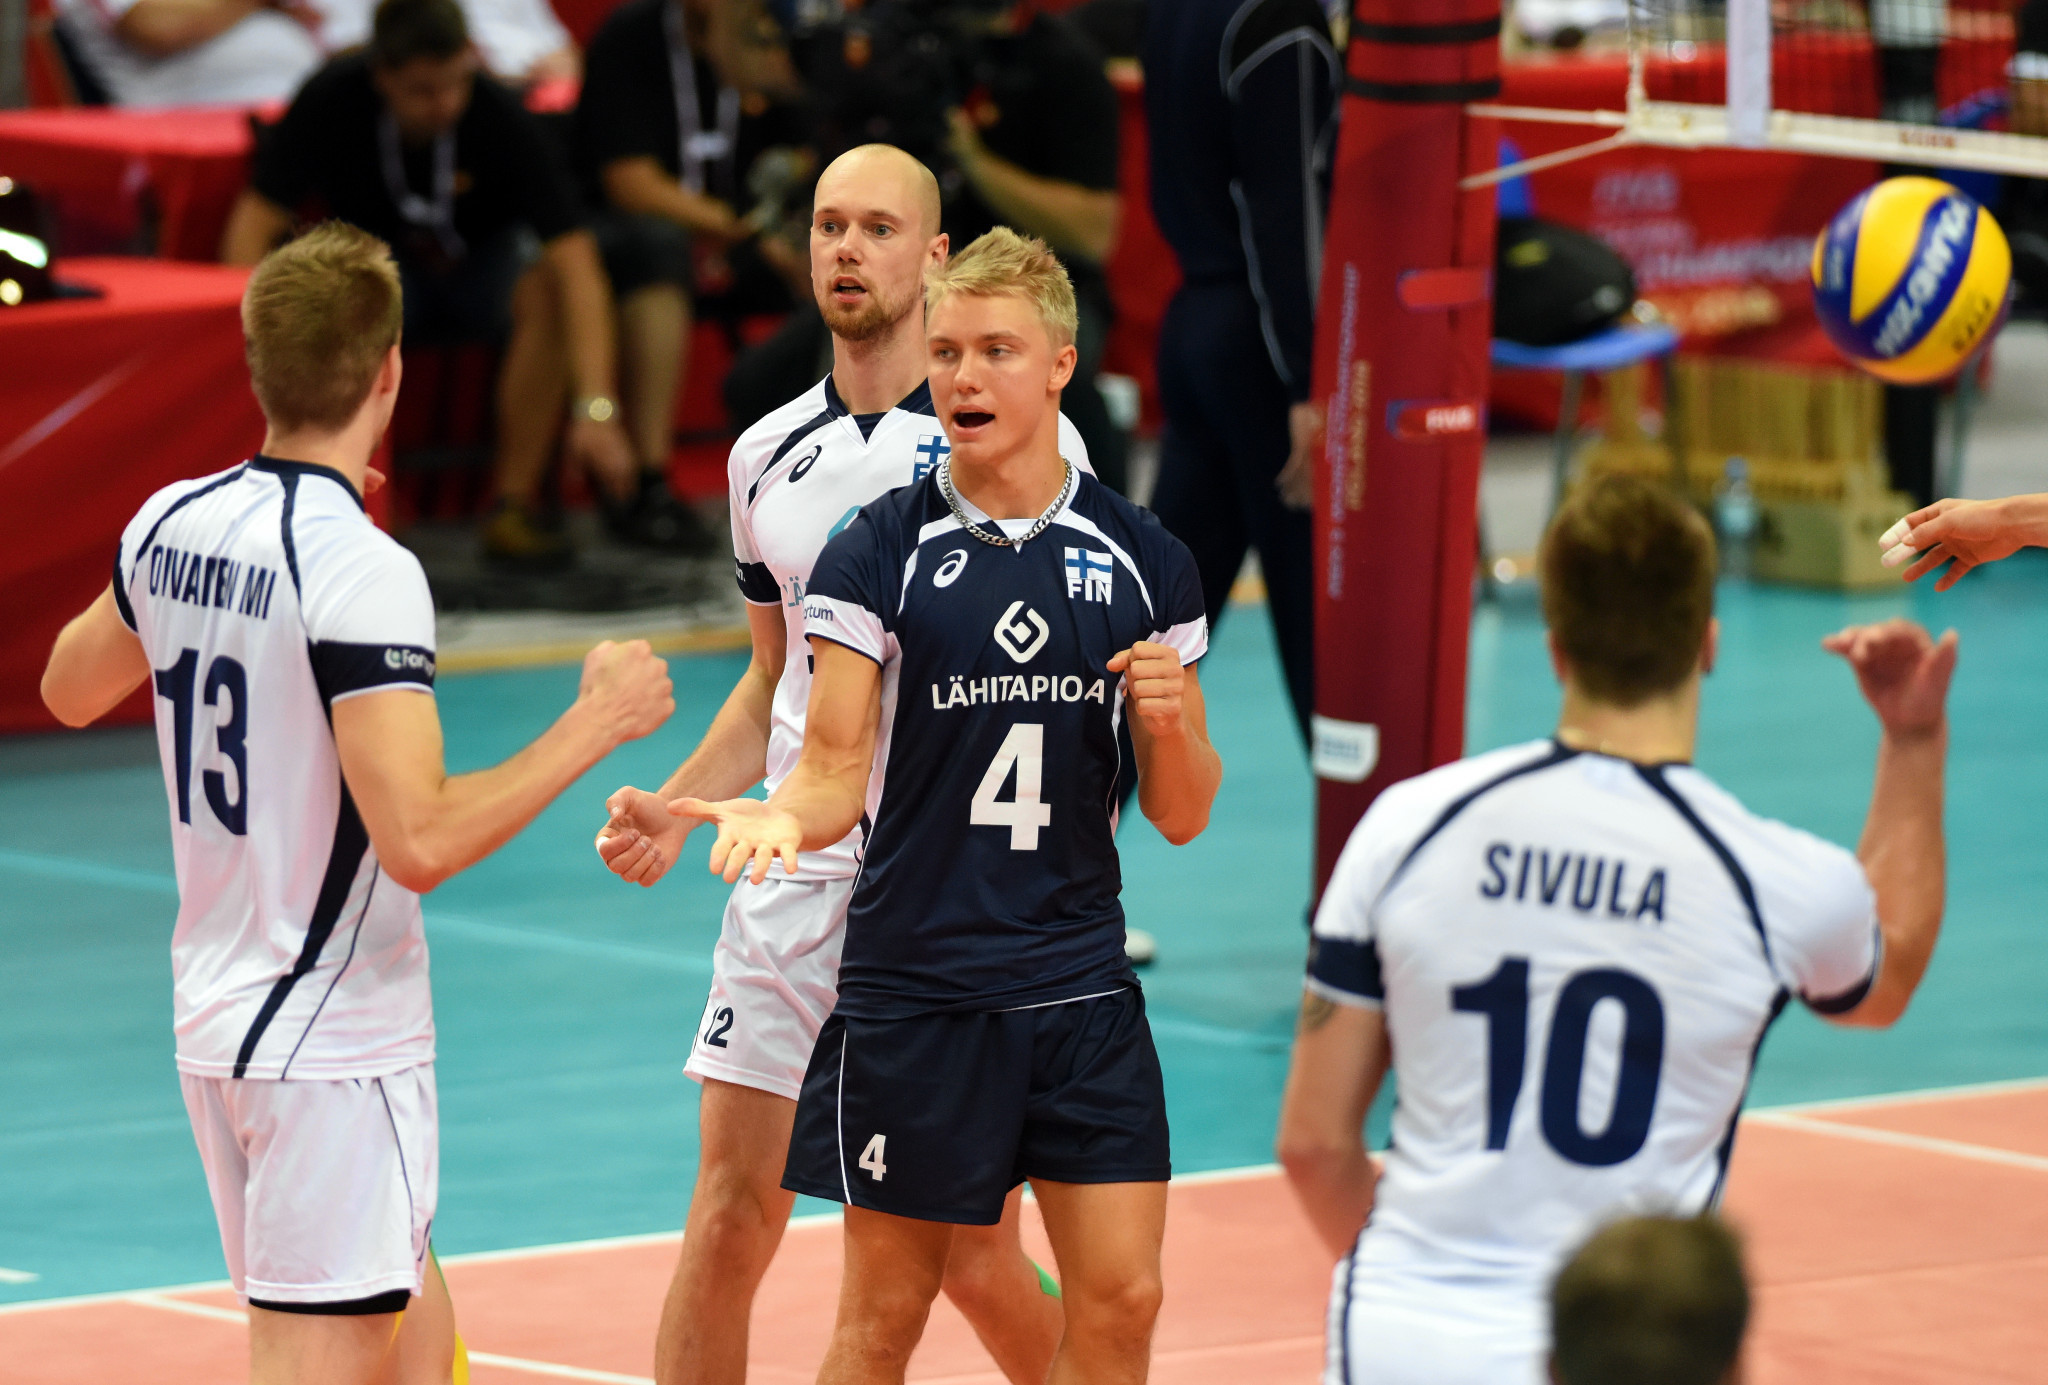 Finnish volleyball player Kerminen axed from national team over playing for Russian club